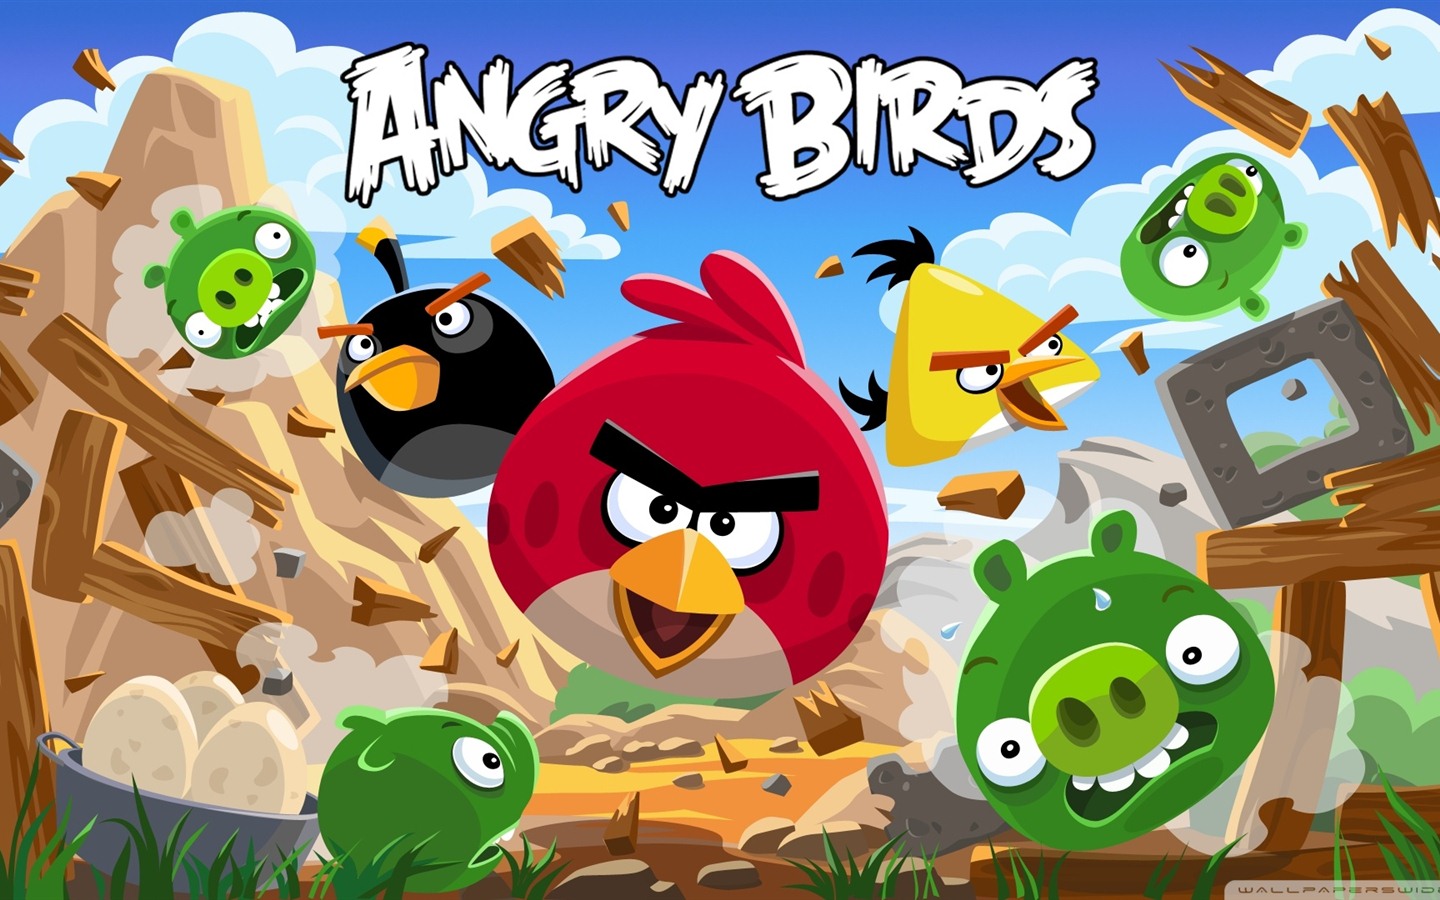 Angry Birds Game Wallpapers #10 - 1440x900